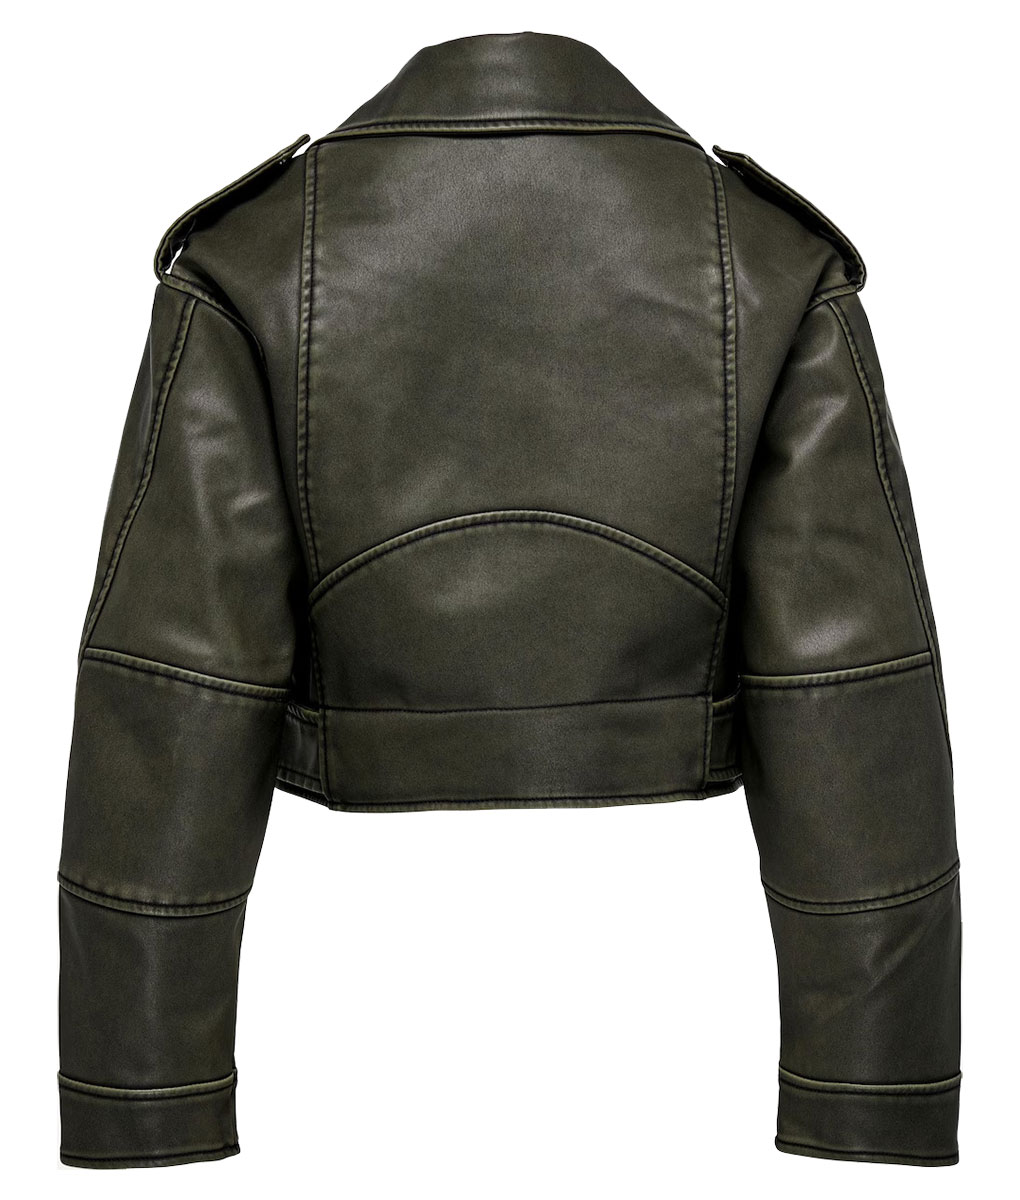 Molly Mae Green Leather Jacket (5)